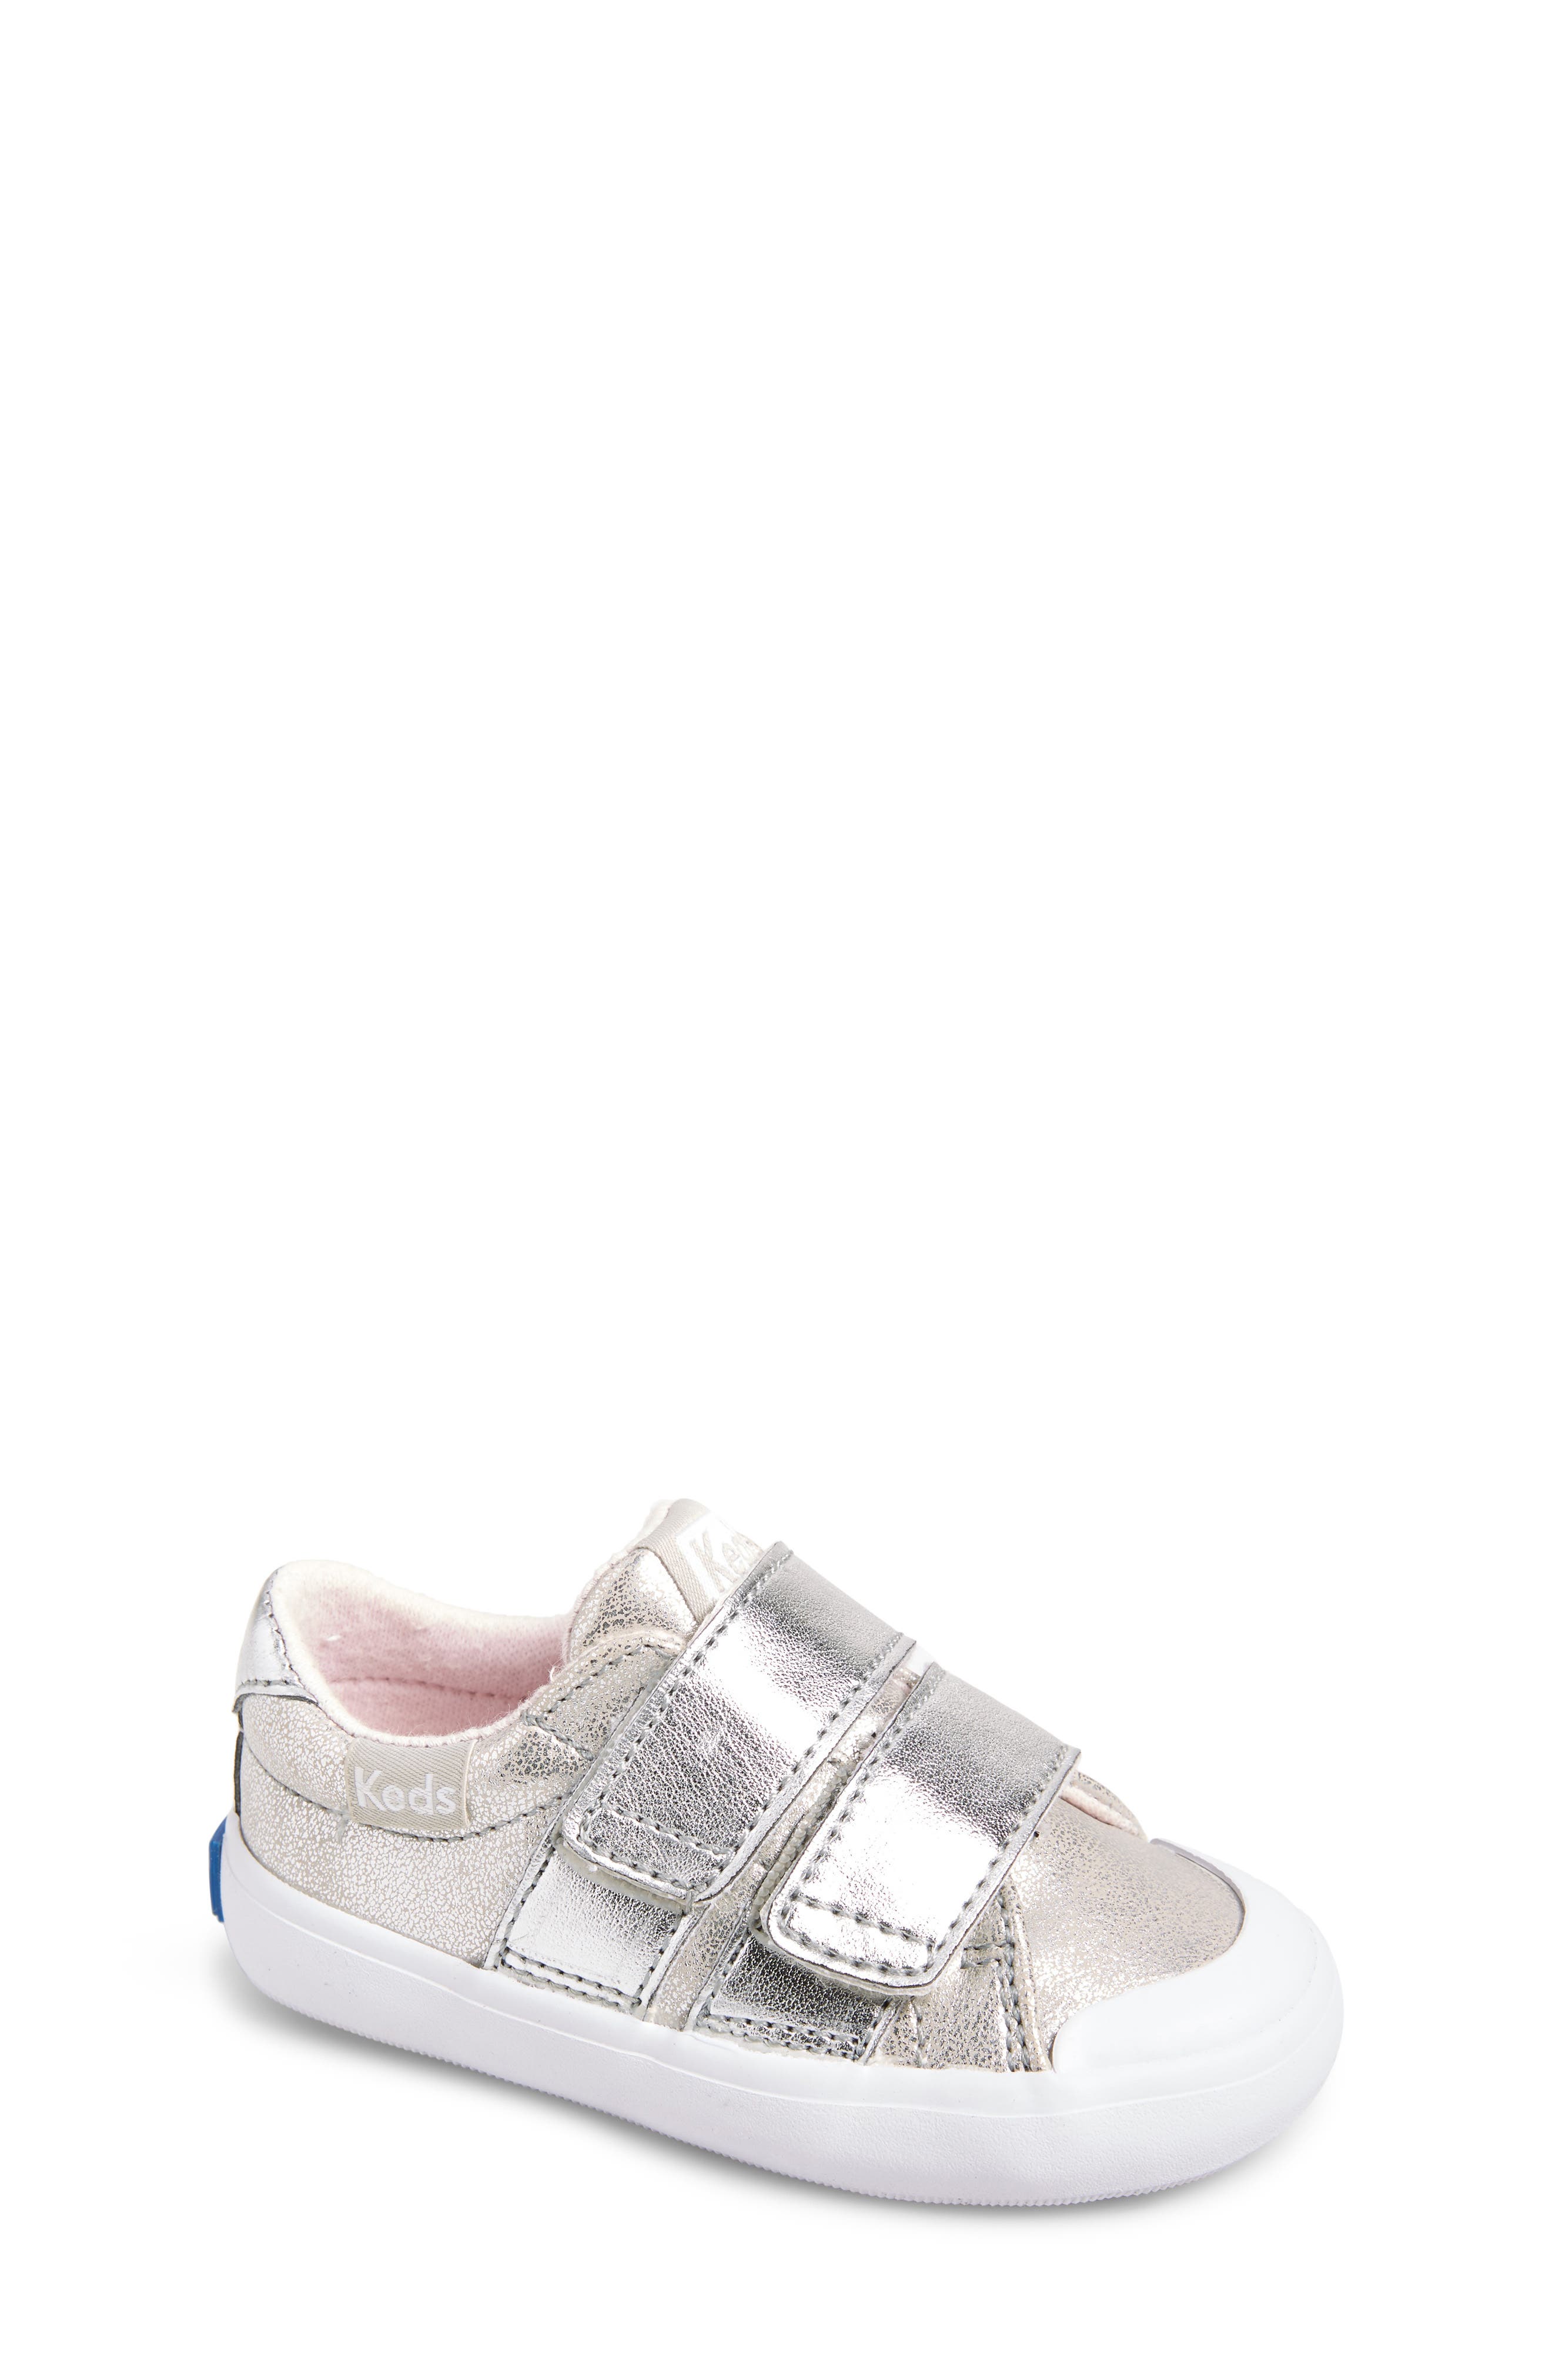 silver keds for toddlers